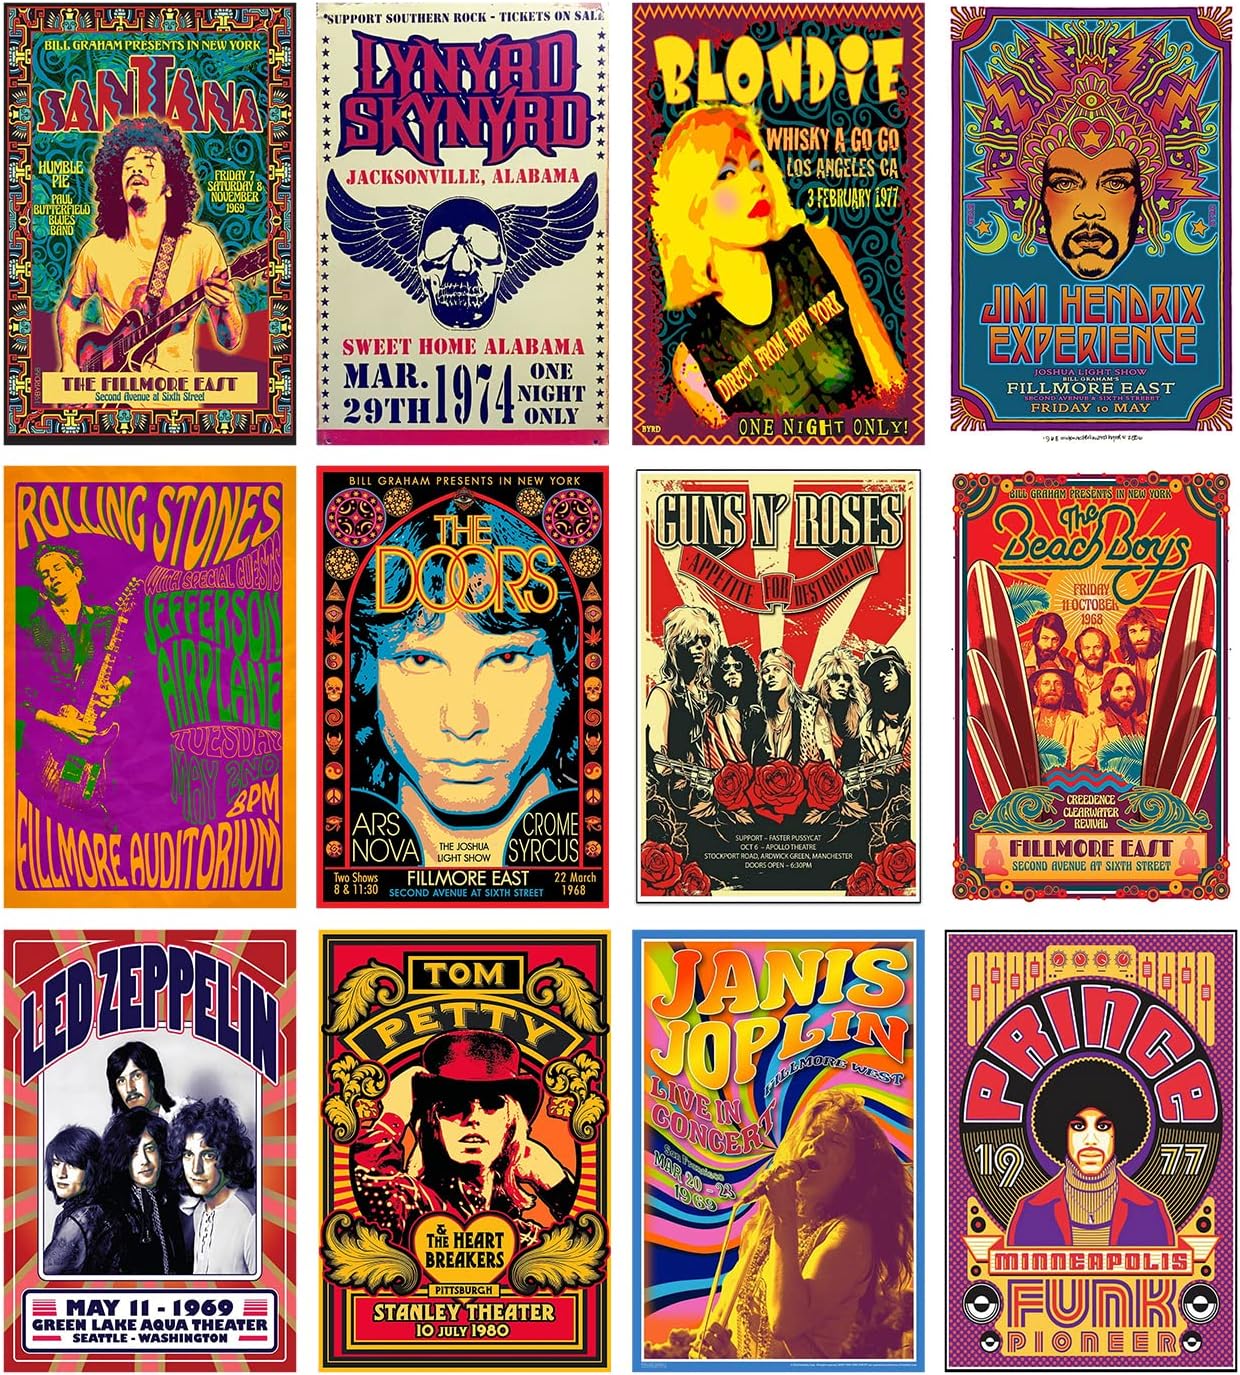 Woonkit Vintage Rock Band Posters for Room Aesthetic, 70s 80s 90s Retro Music Bedroom Decor Wall Art, Music Concert Poster Wall Collage, Old Music Album Cover Prints (12 SET A, 7.8X11.8 INCH)